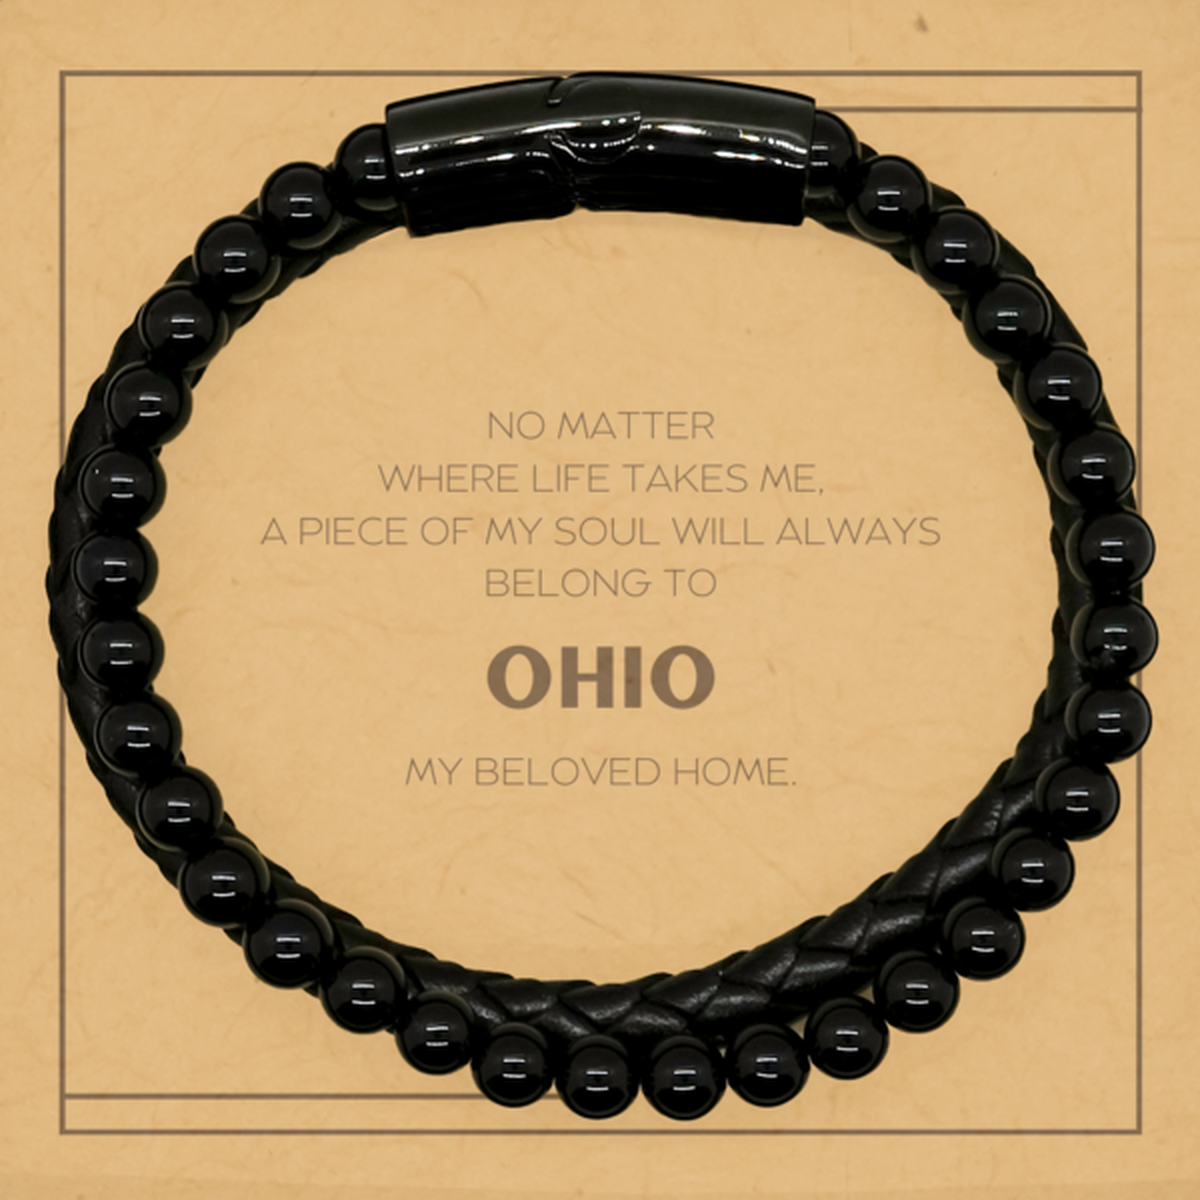 Love Ohio State Gifts, My soul will always belong to Ohio, Proud Stone Leather Bracelets, Birthday Unique Gifts For Ohio Men, Women, Friends